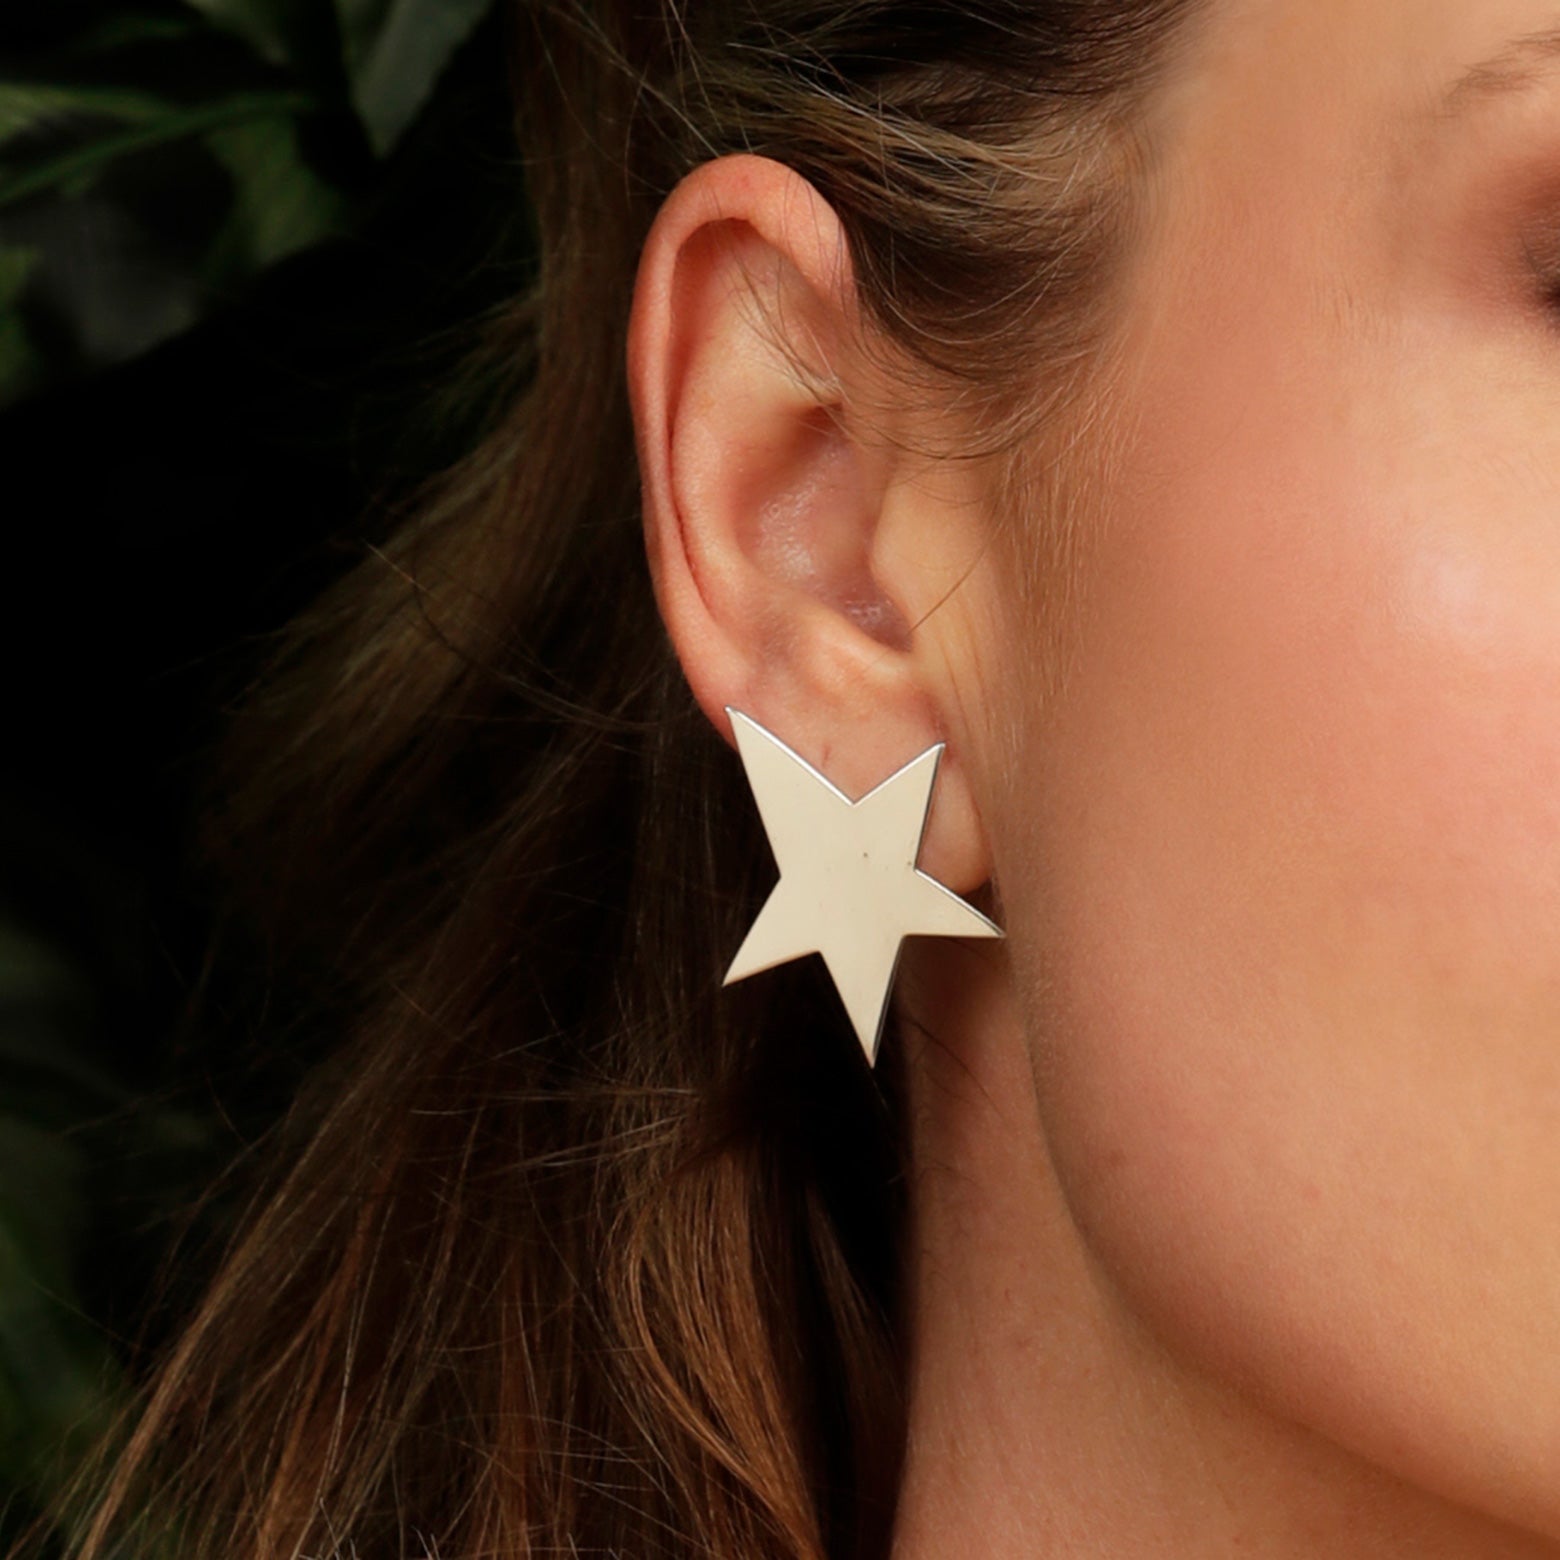 Close up of an ear wearing the Kelly Woodcroft silver starfish earrings.